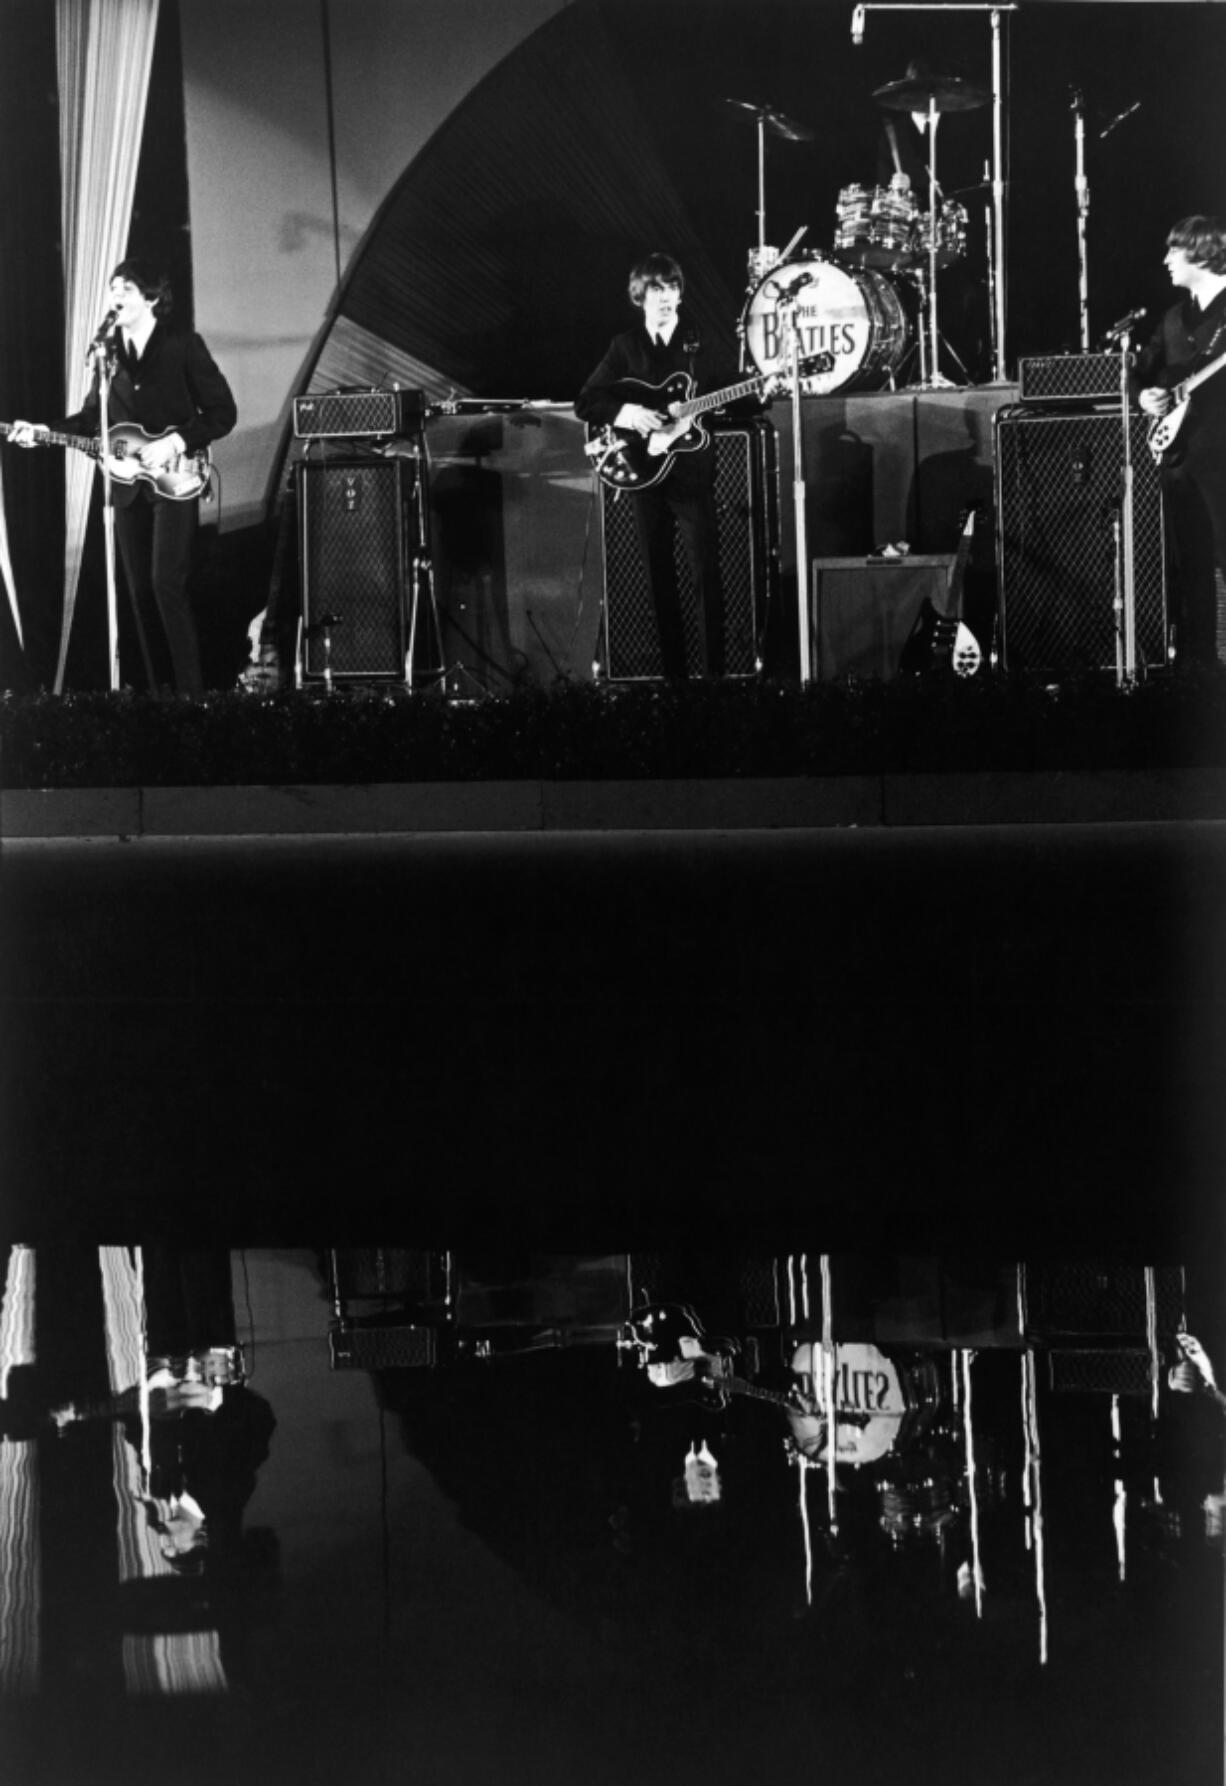 British pop group The Beatles, and their reflection, playing live at the Hollywood Bowl on Aug. 23, 1964, in Los Angeles.